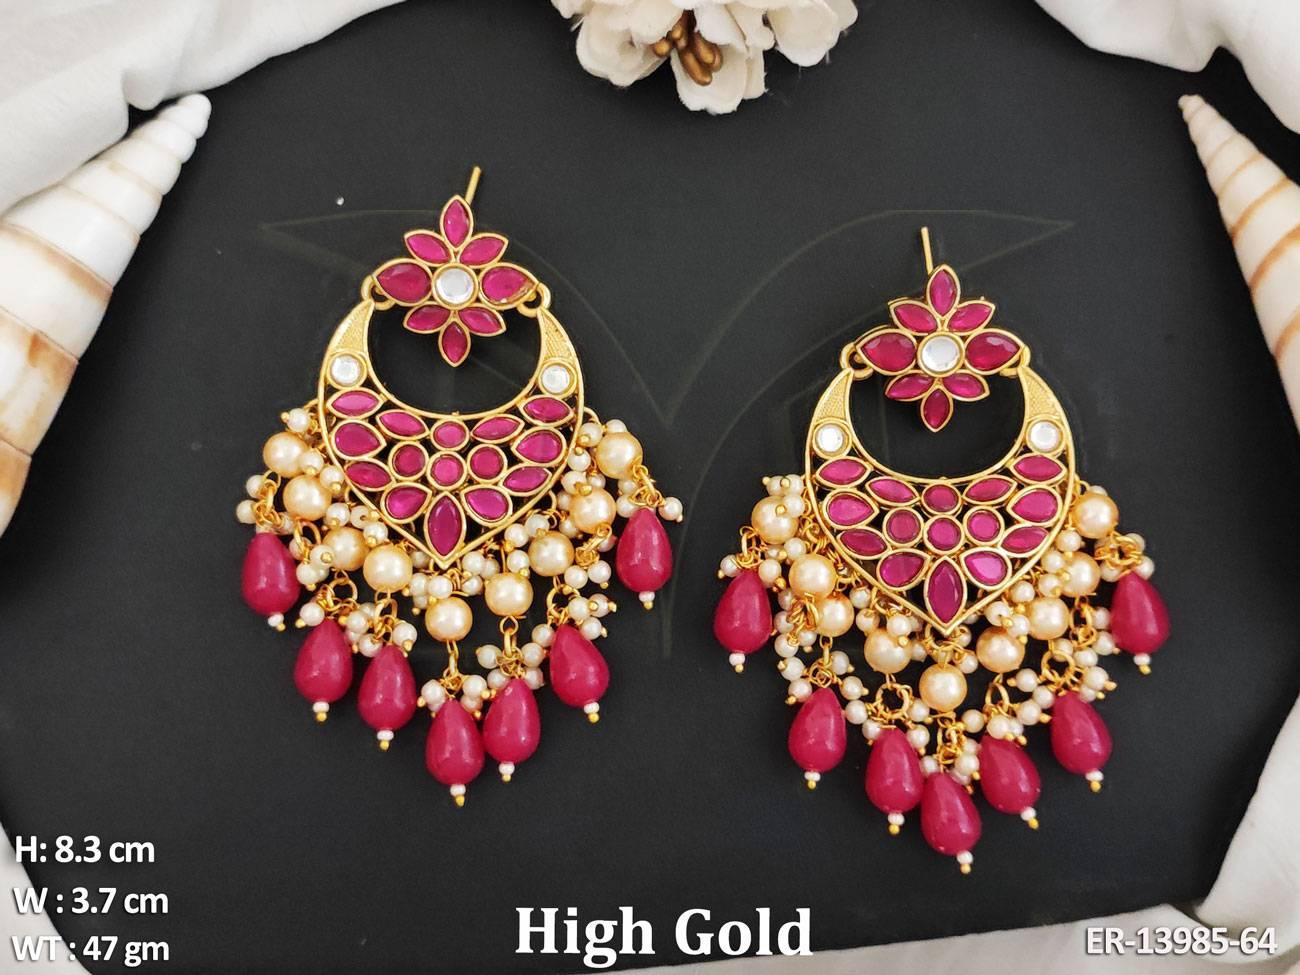 Featuring a unique designer high gold polish and fancy antique style, these long dangler earrings are perfect for any party or special occasion